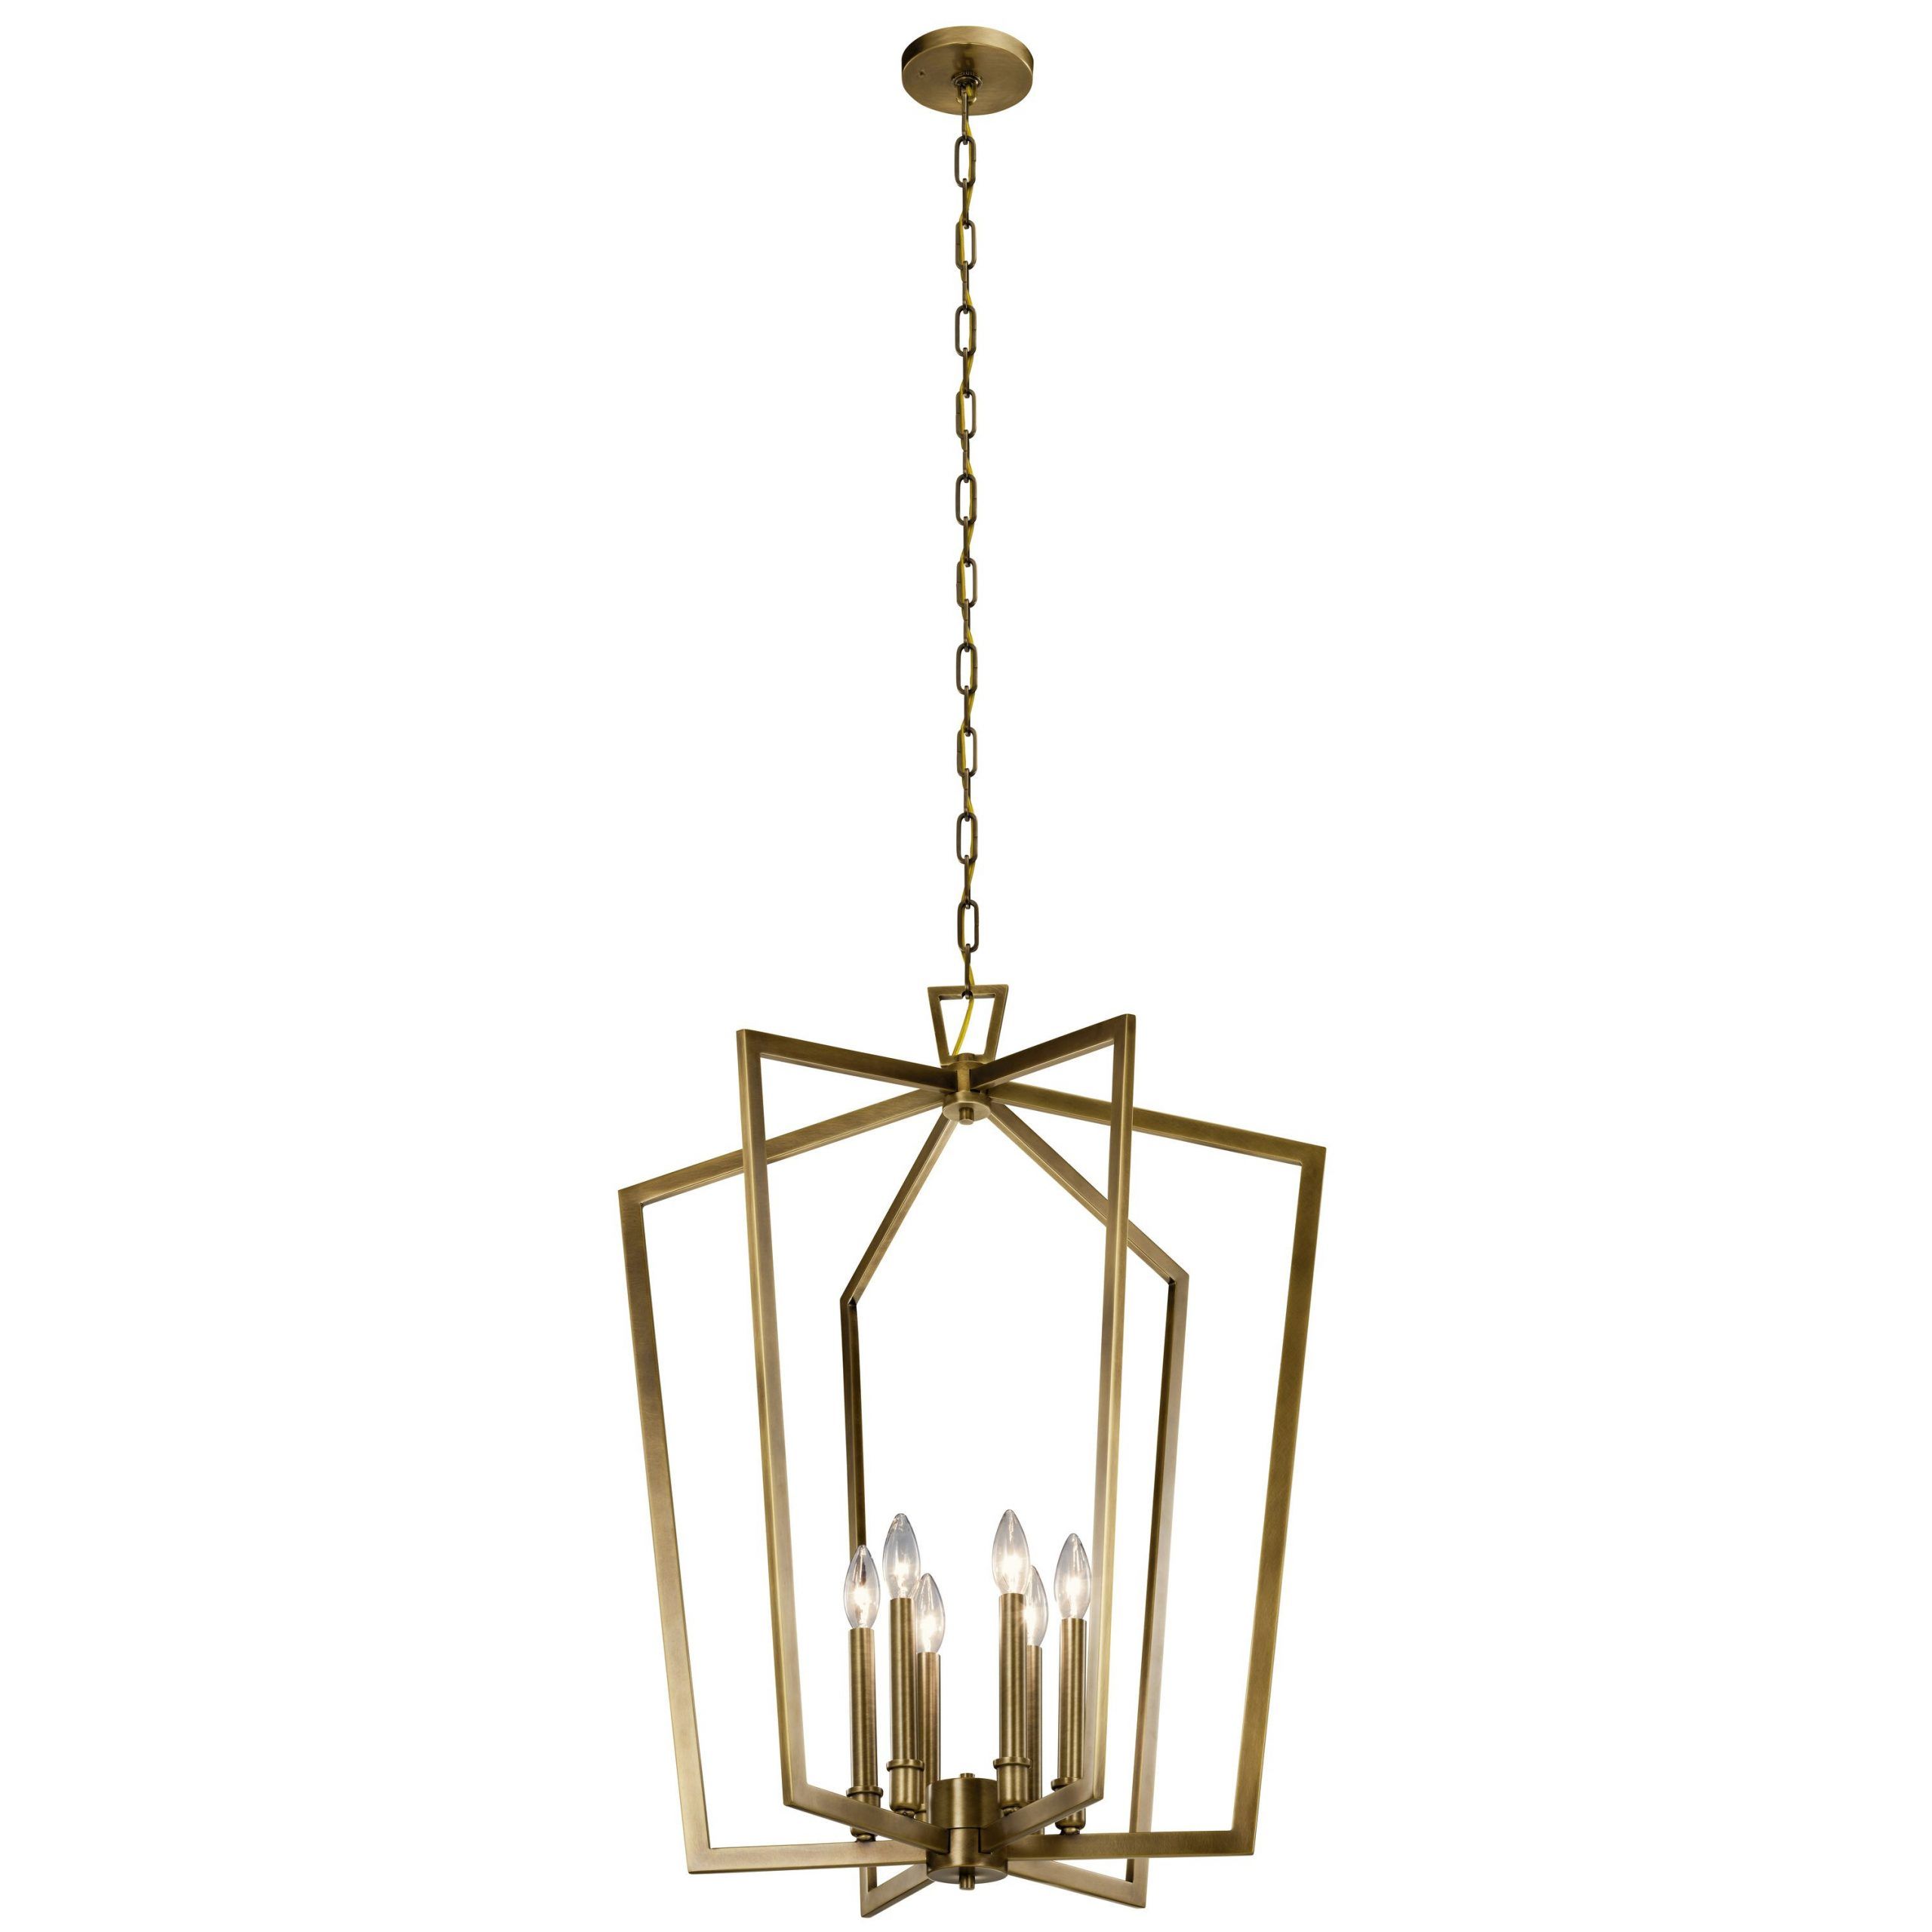 Well Known Kichler Abbotswell 6 Light Natural Brass Traditional Lantern Pendant Light  In The Pendant Lighting Department At Lowes For Natural Brass Lantern Chandeliers (View 7 of 15)